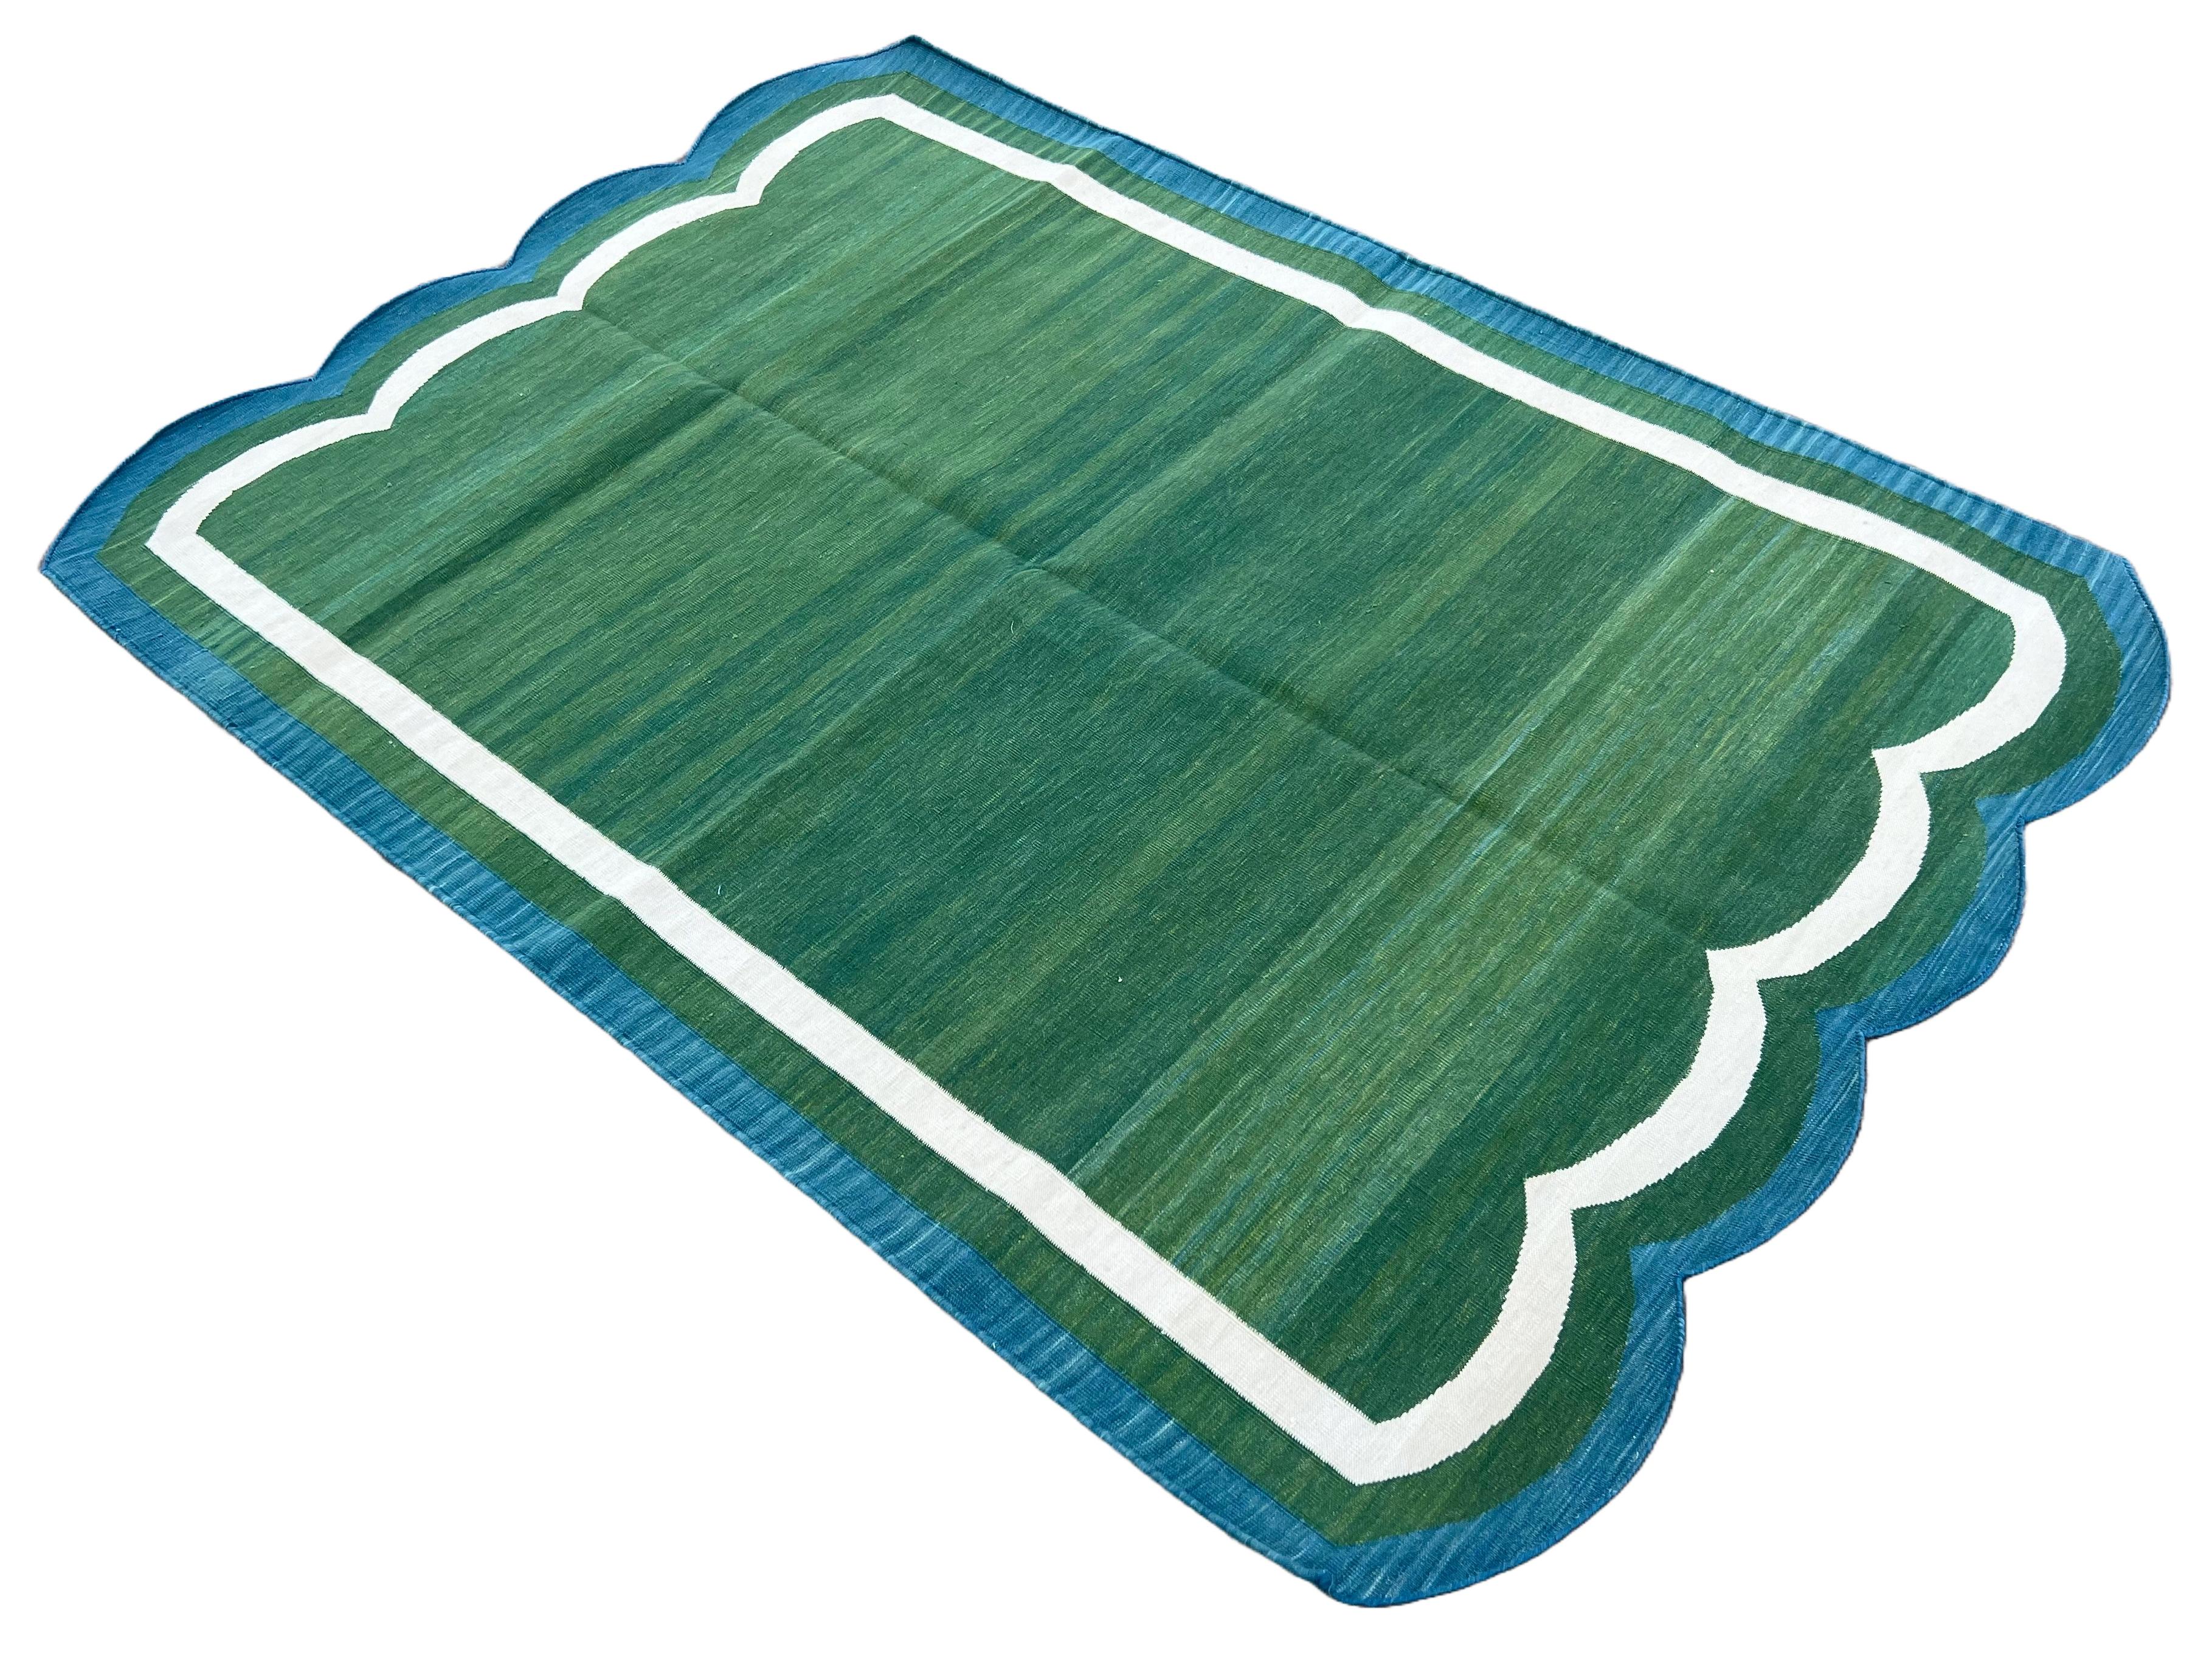 Cotton Vegetable Dyed Forest Green & Teal Blue Two Sided Scalloped Rug-4'x6' (Scallops runs on all 4 Sides)
These special flat-weave dhurries are hand-woven with 15 ply 100% cotton yarn. Due to the special manufacturing techniques used to create our